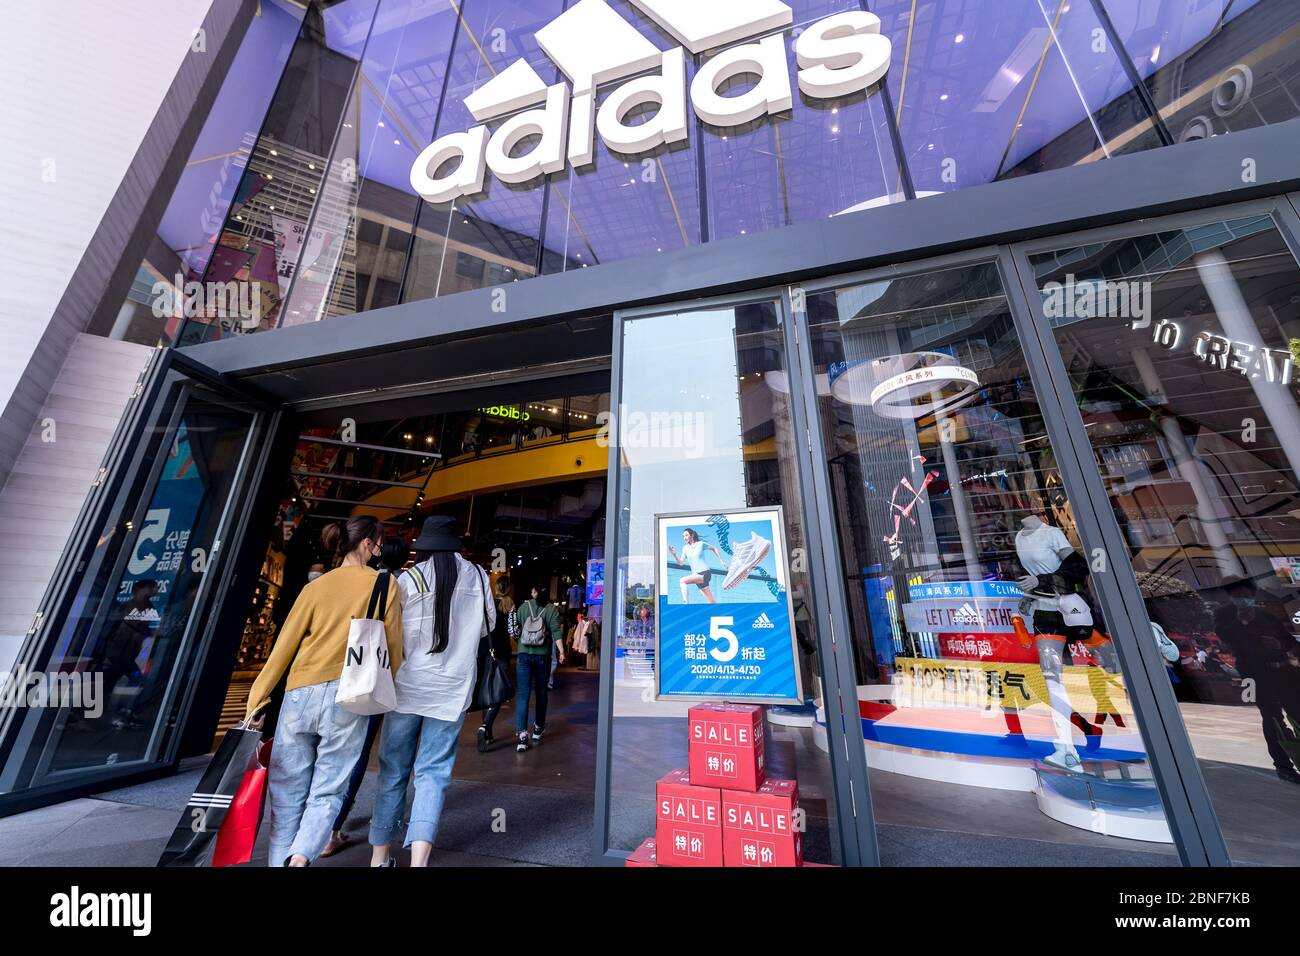 The exterior view of an Adidas store 